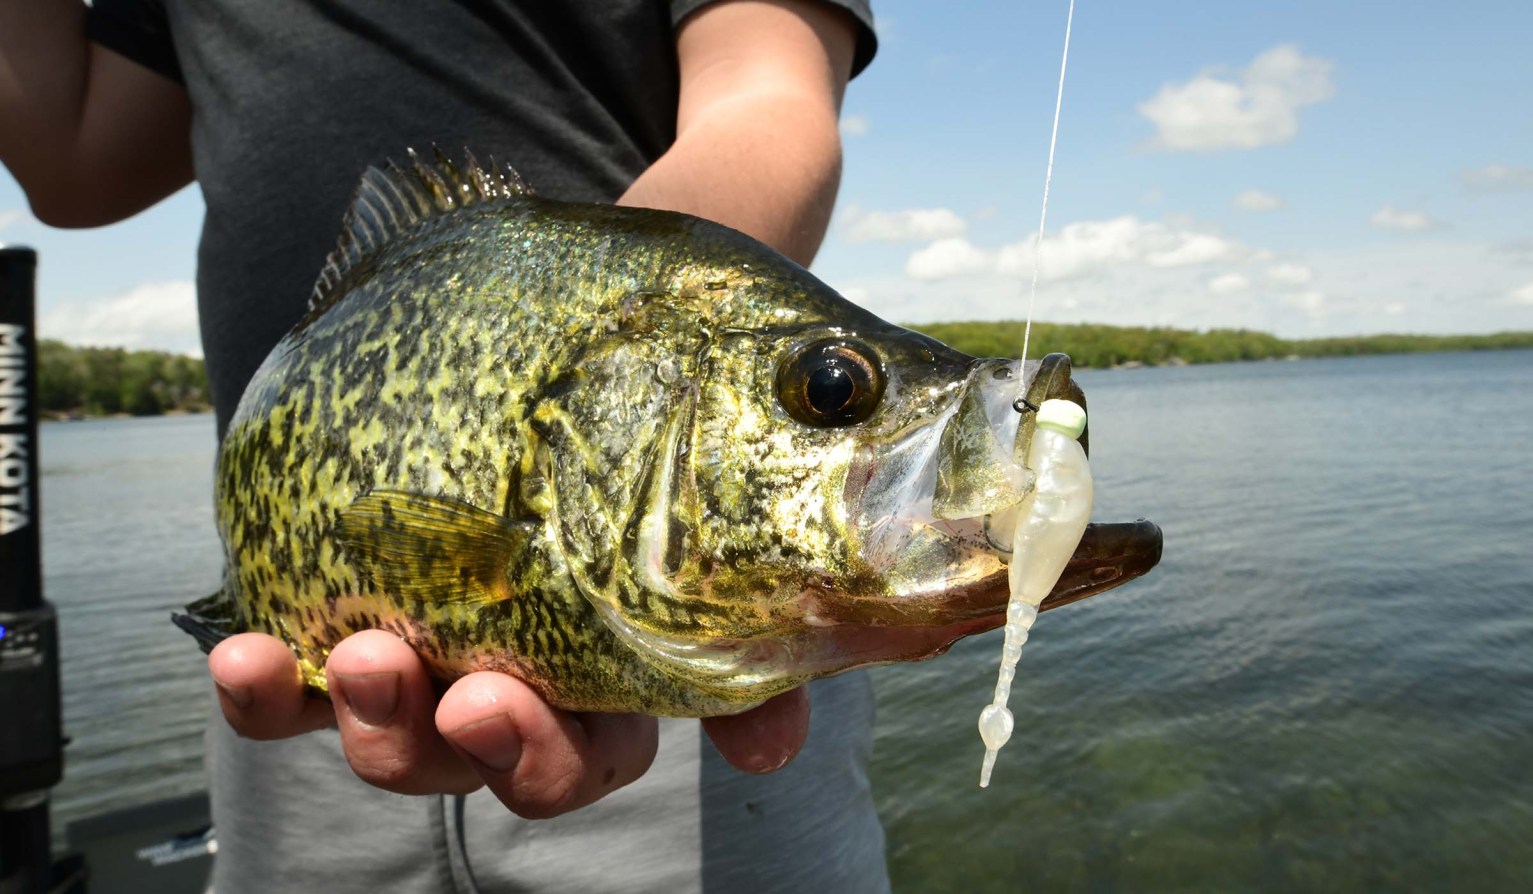 The best crappie fishing lines being tested on the water.